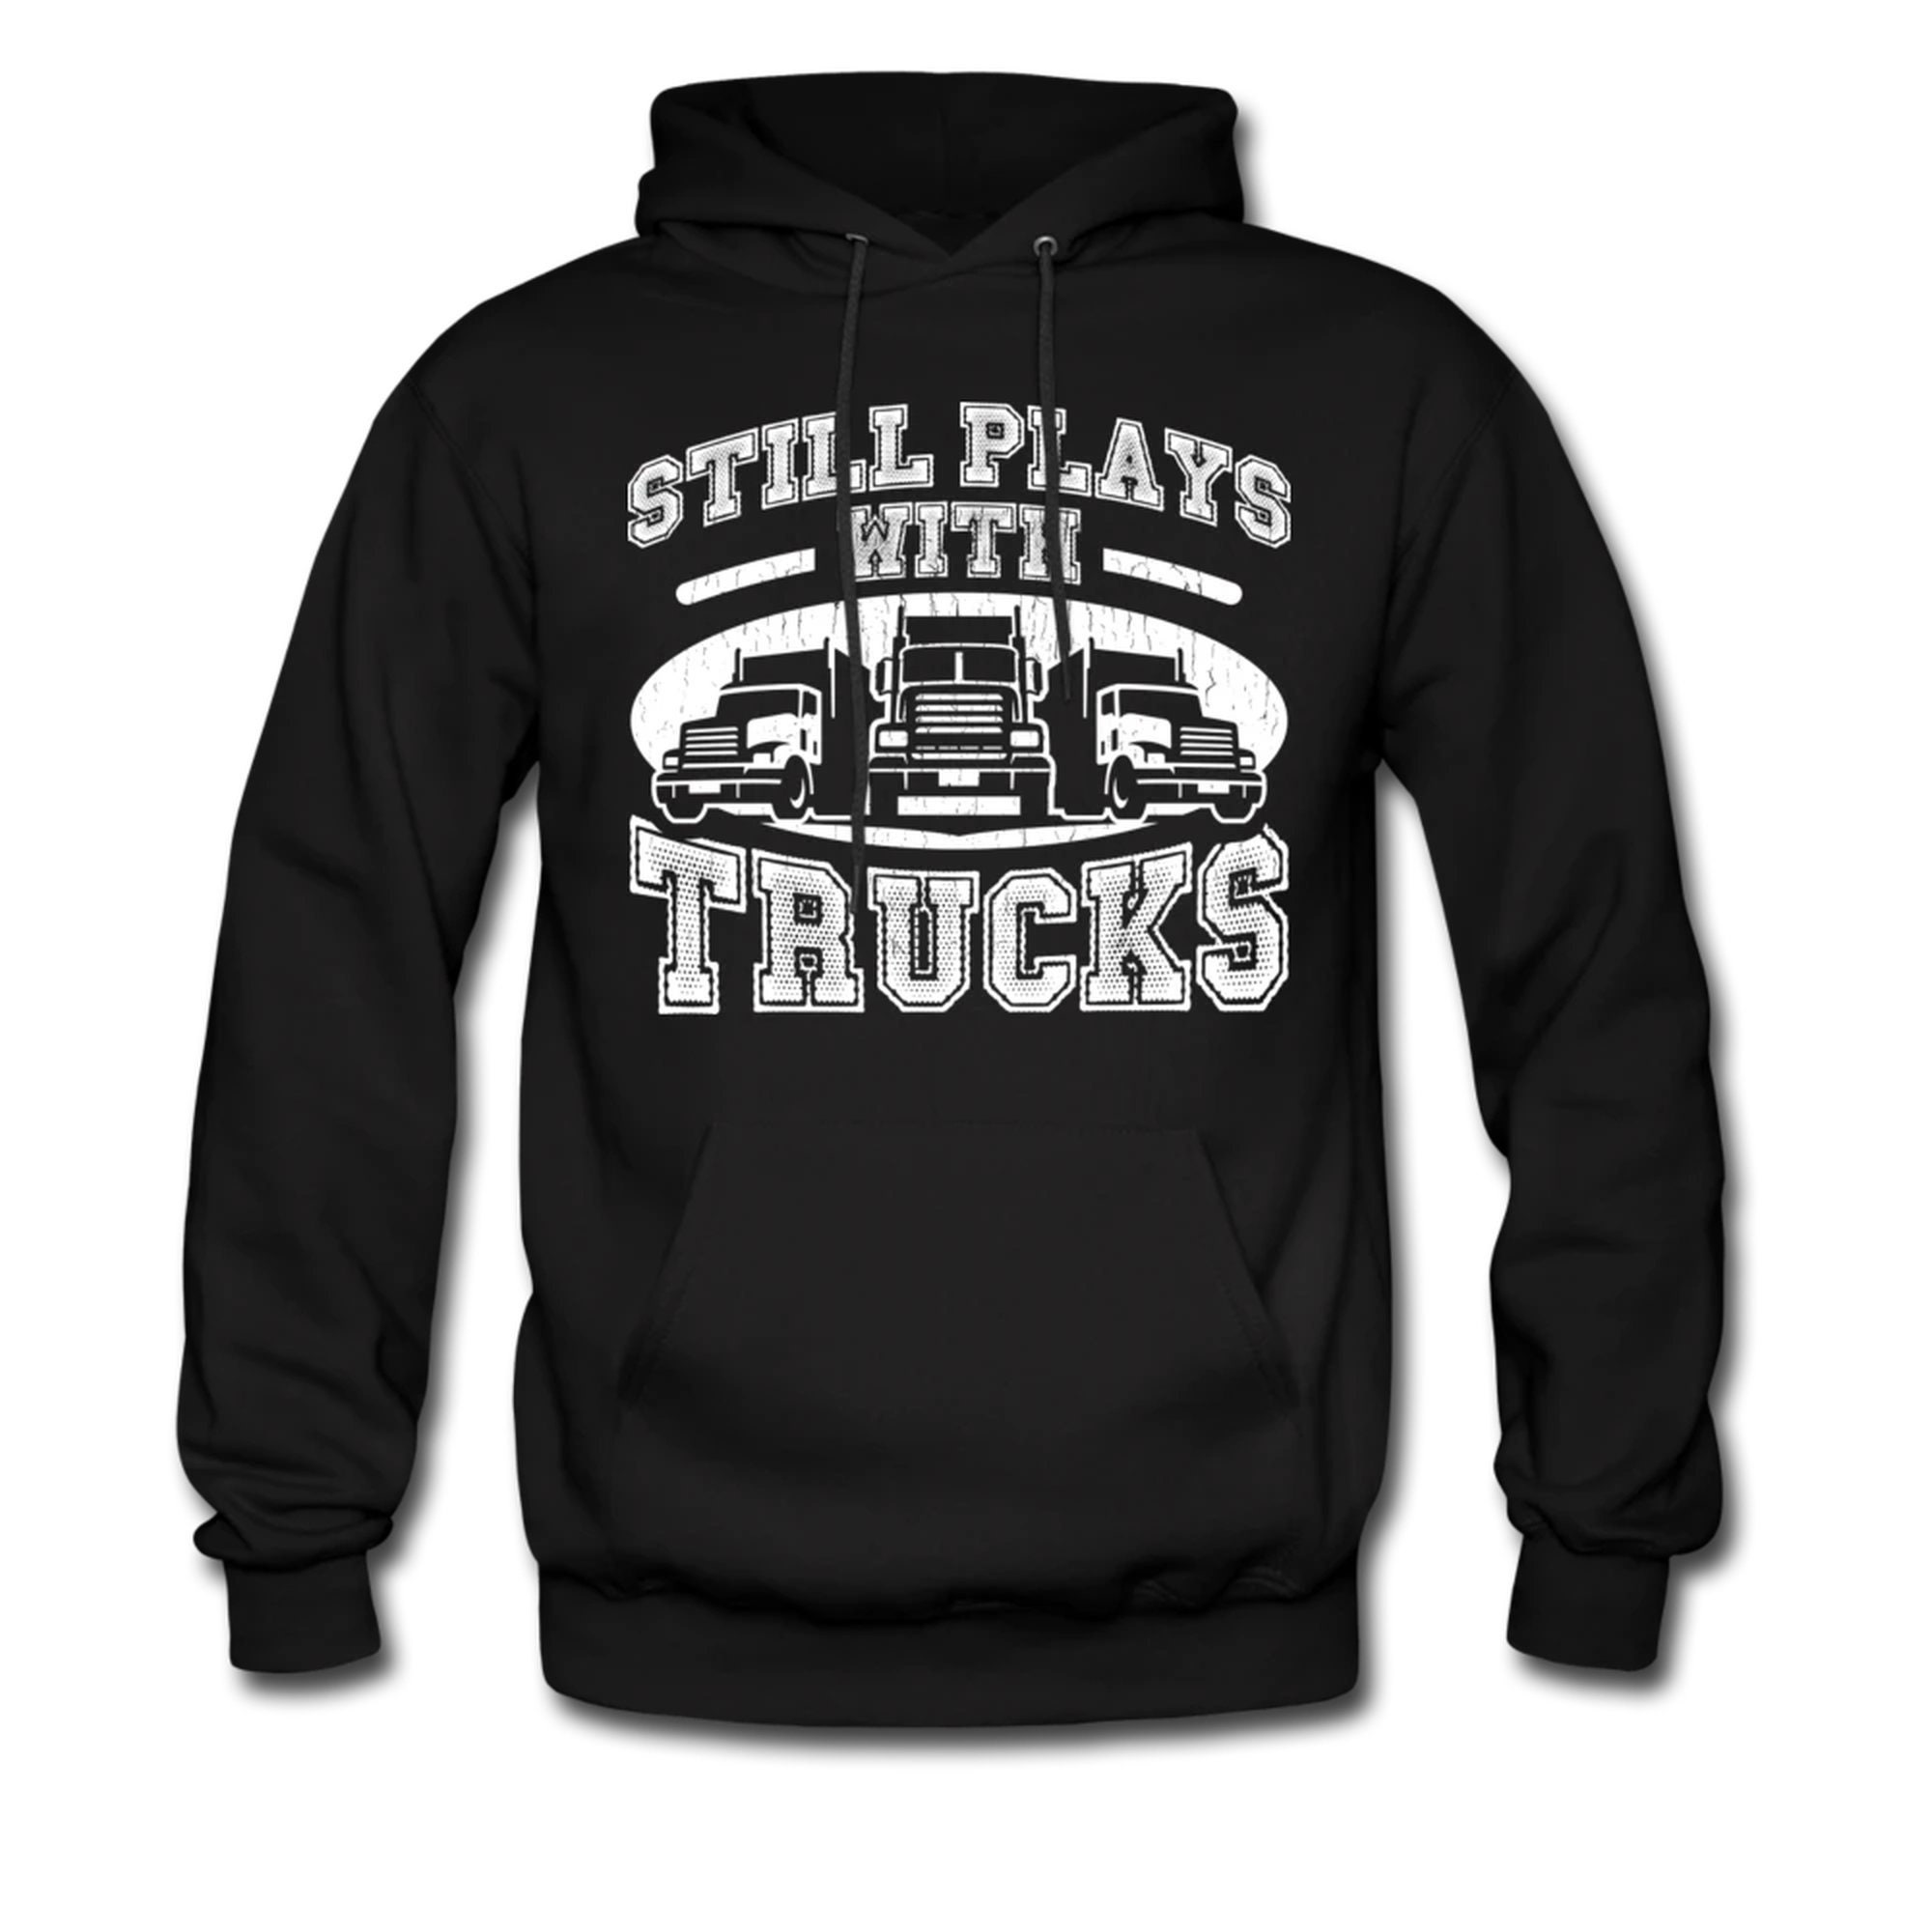 Stylish Trucker-Themed Pullover Hoodie